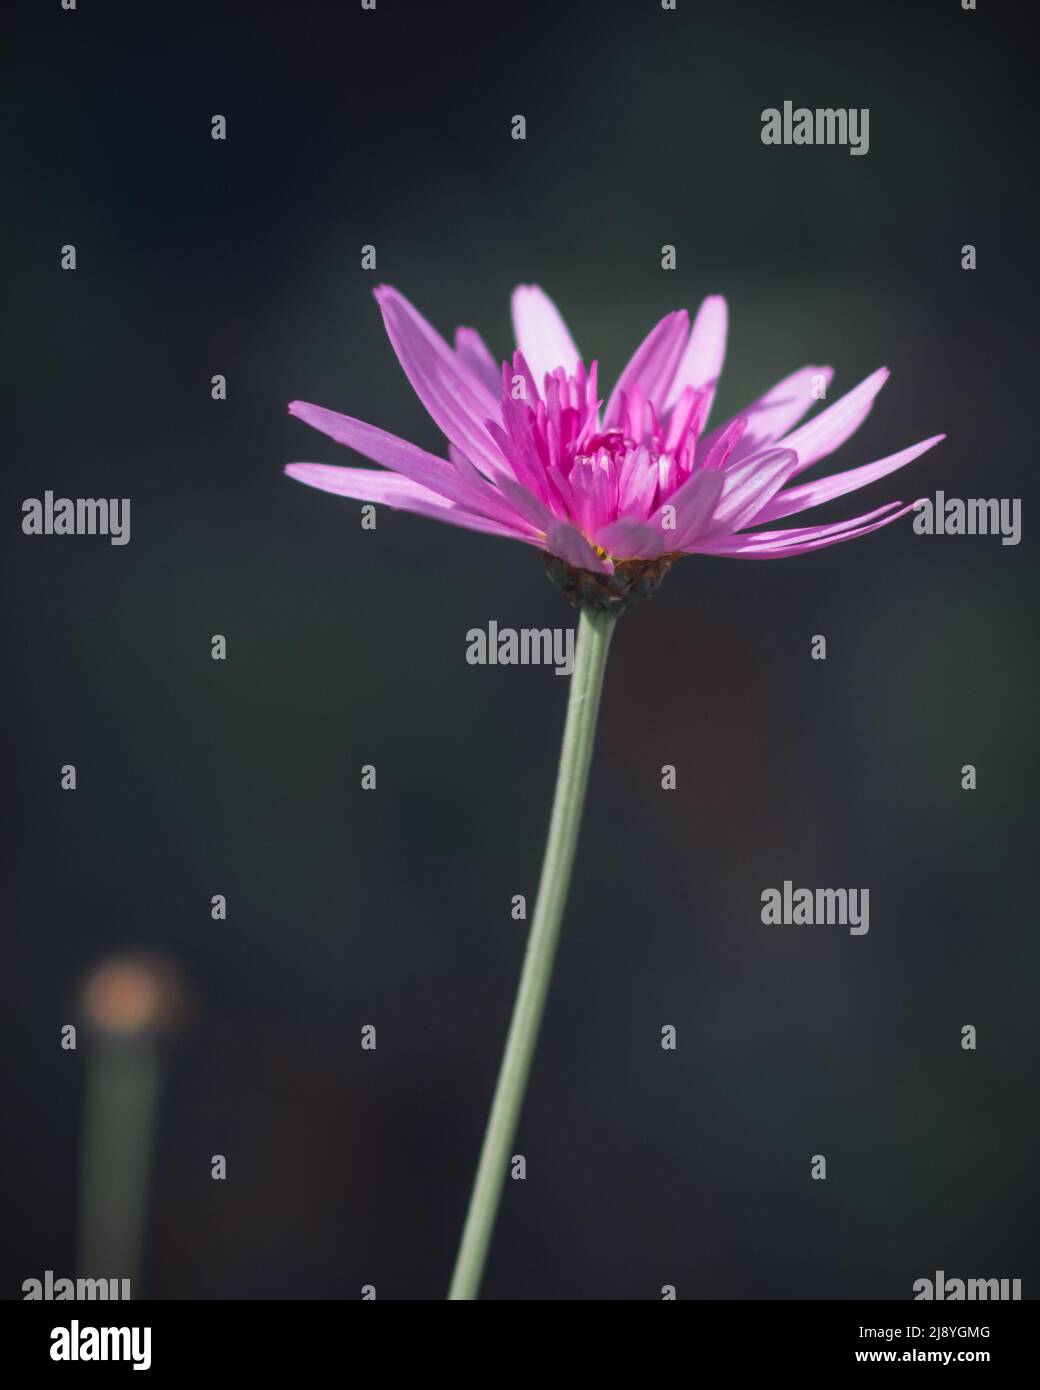 Pink Chinese aster flower blooming in a dark environment illuminated by the sunlight. Beautiful flower blooming against a dark blurred background Stock Photo